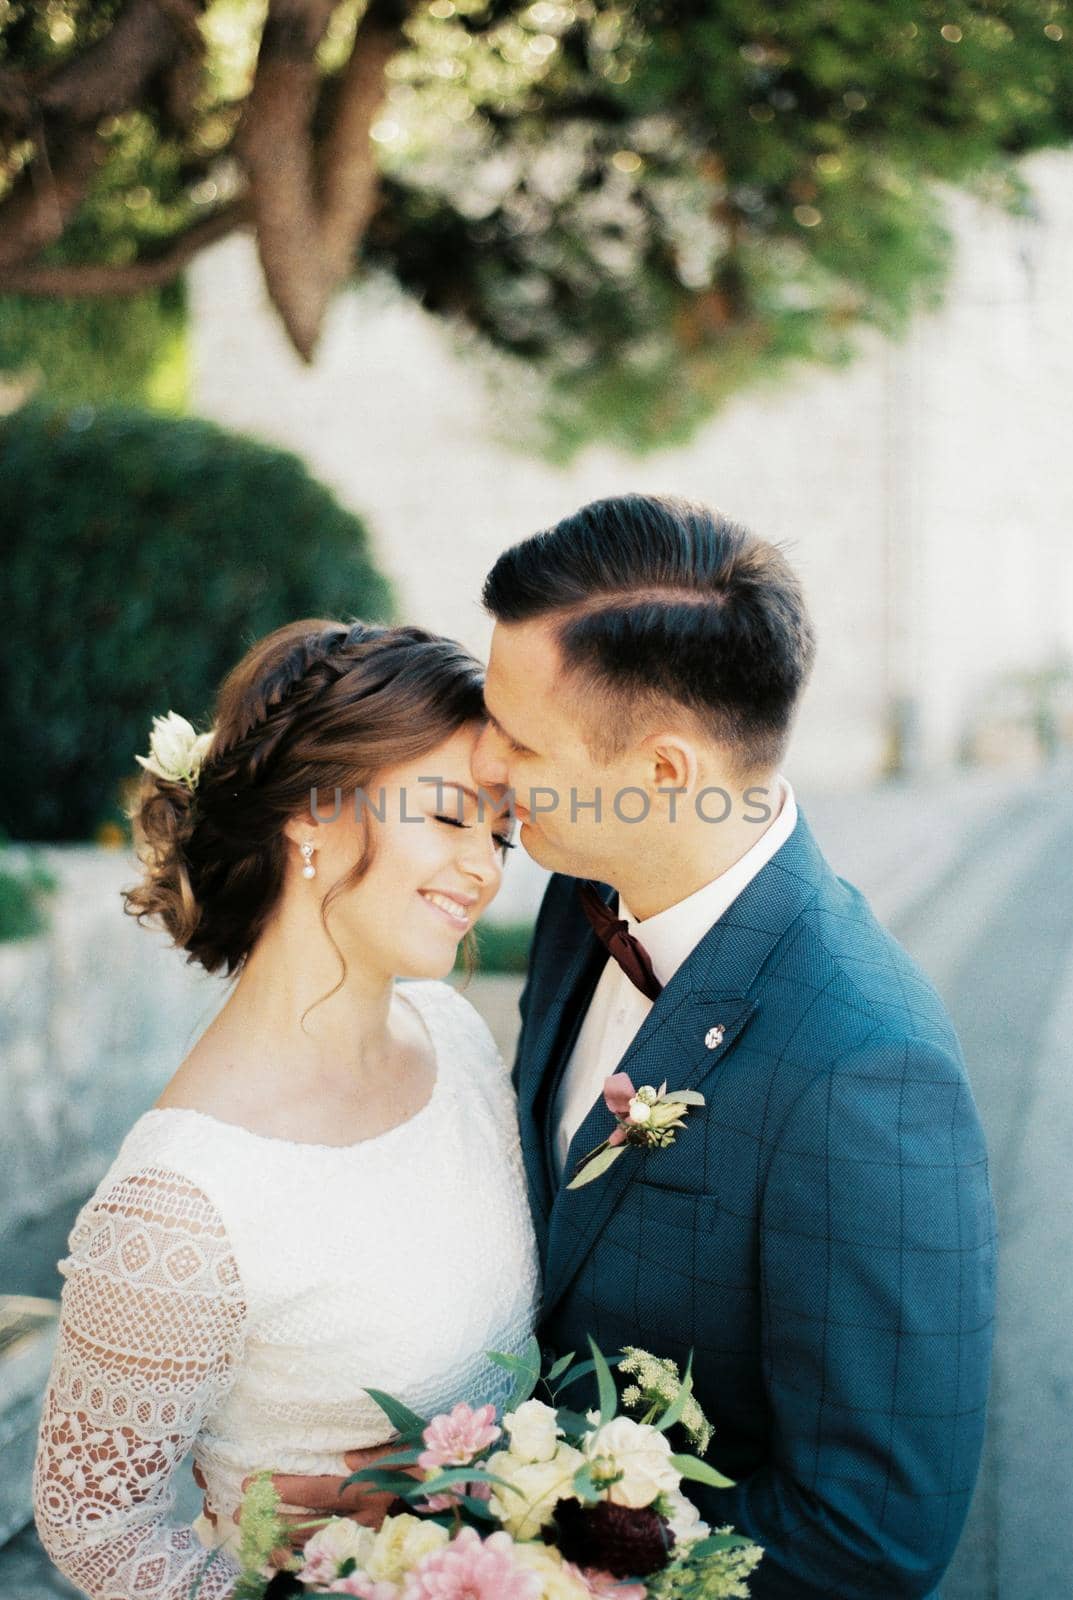 Groom hugs bride by the waist and kisses her forehead. Portrait. High quality photo